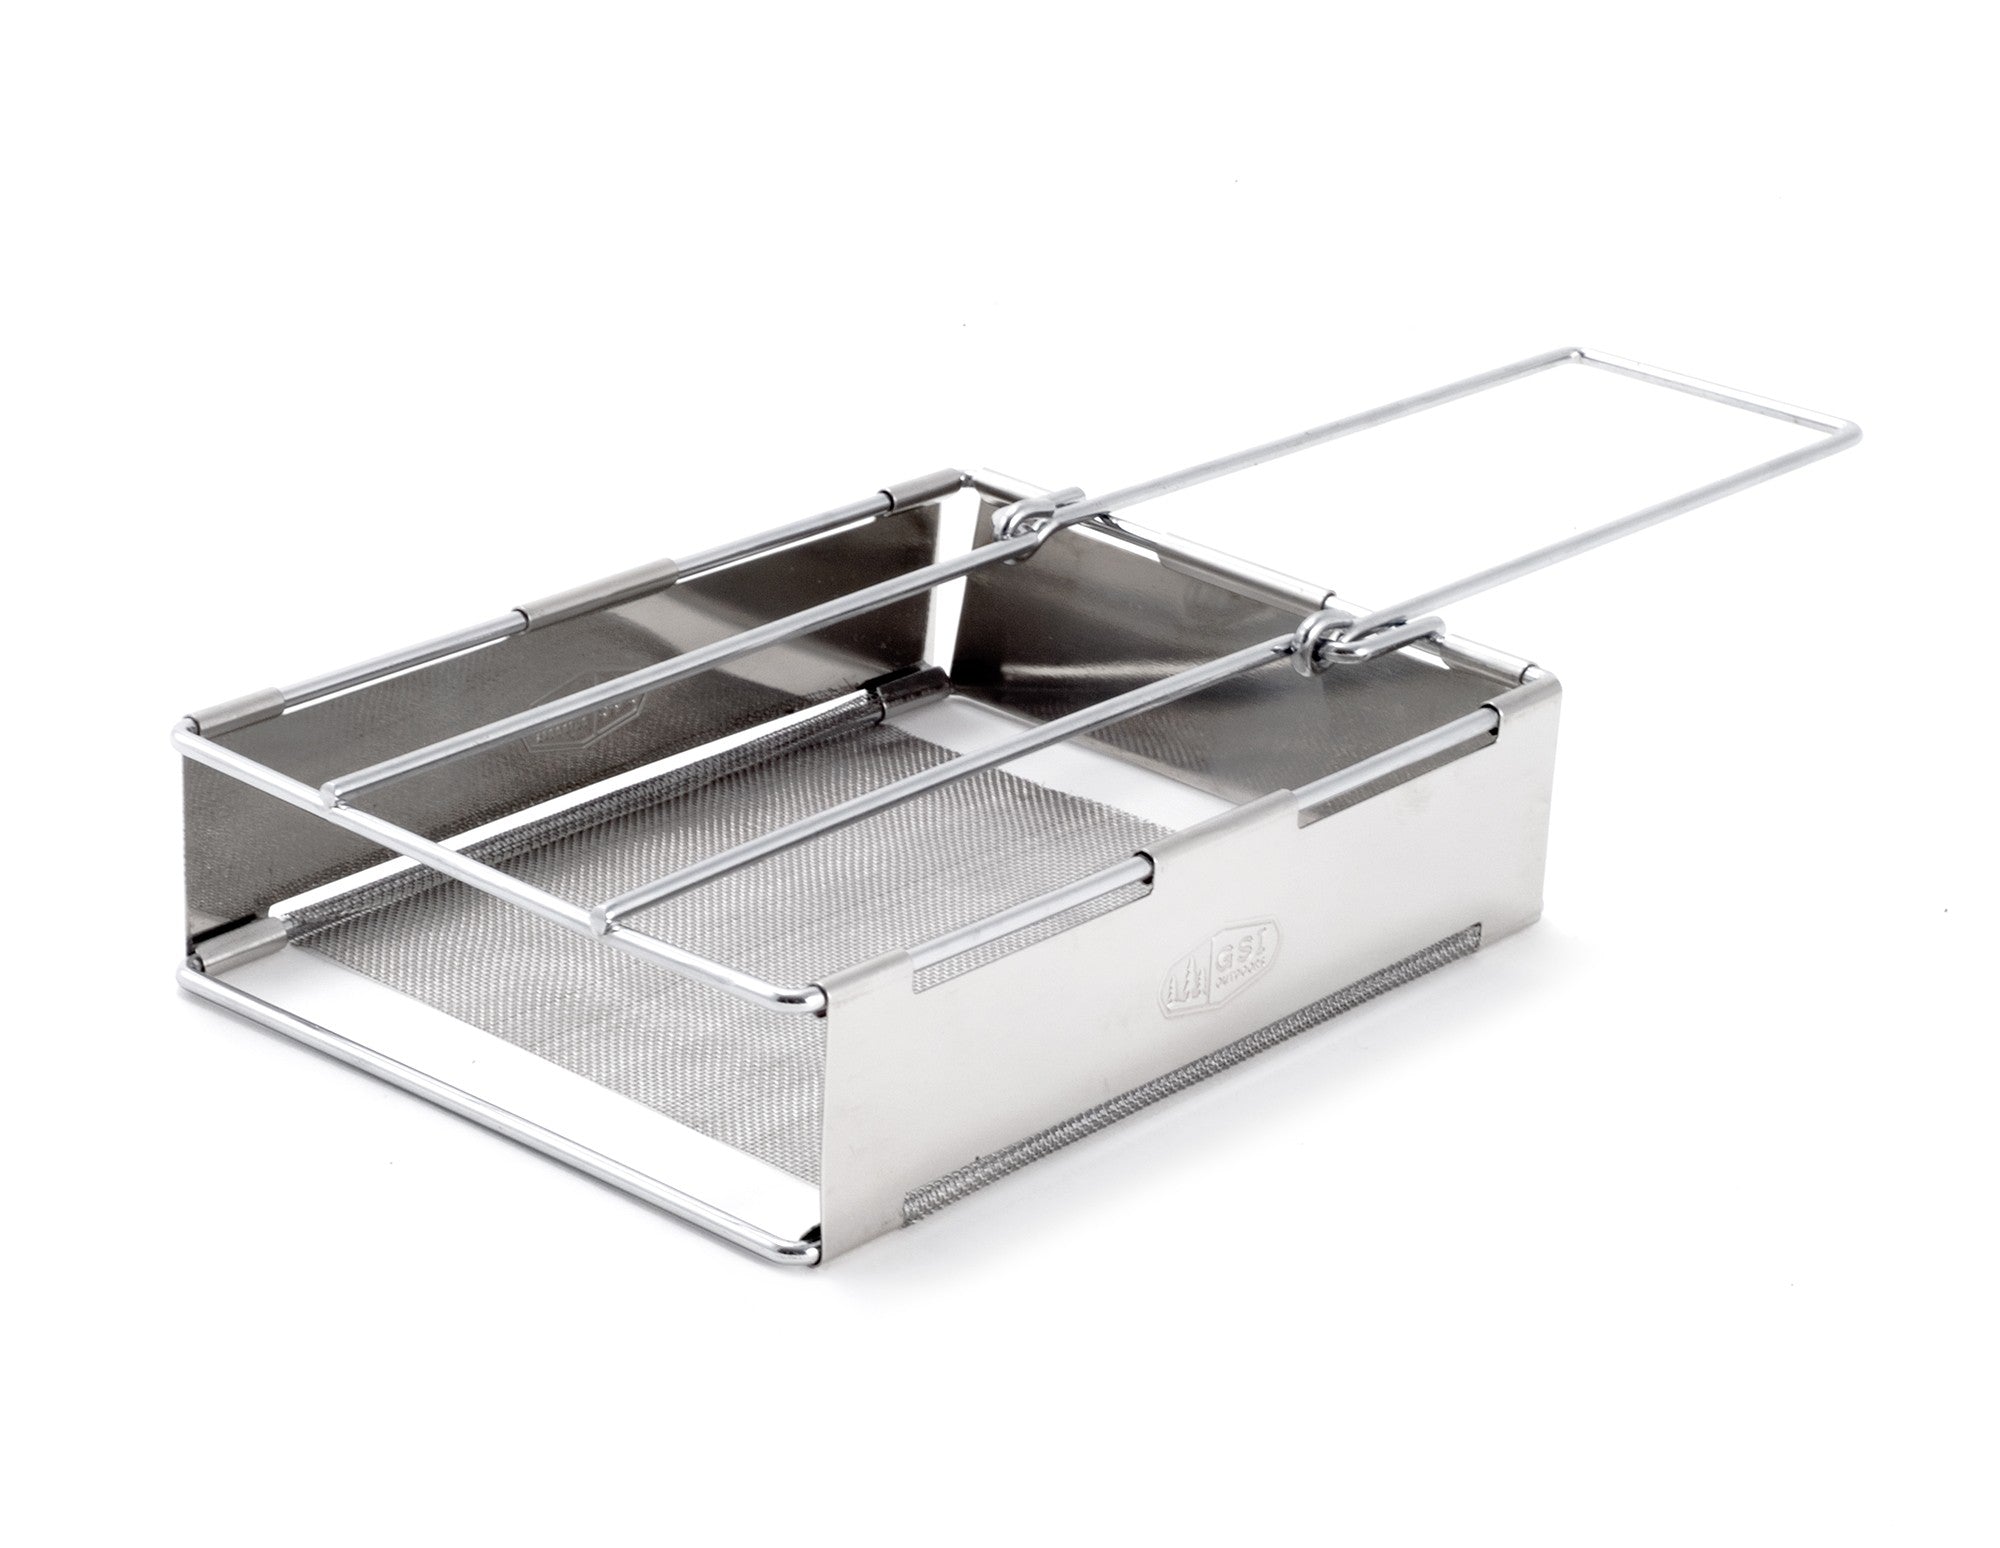 Glacier Stainless 1 Person Mess Kit | GSI Outdoors